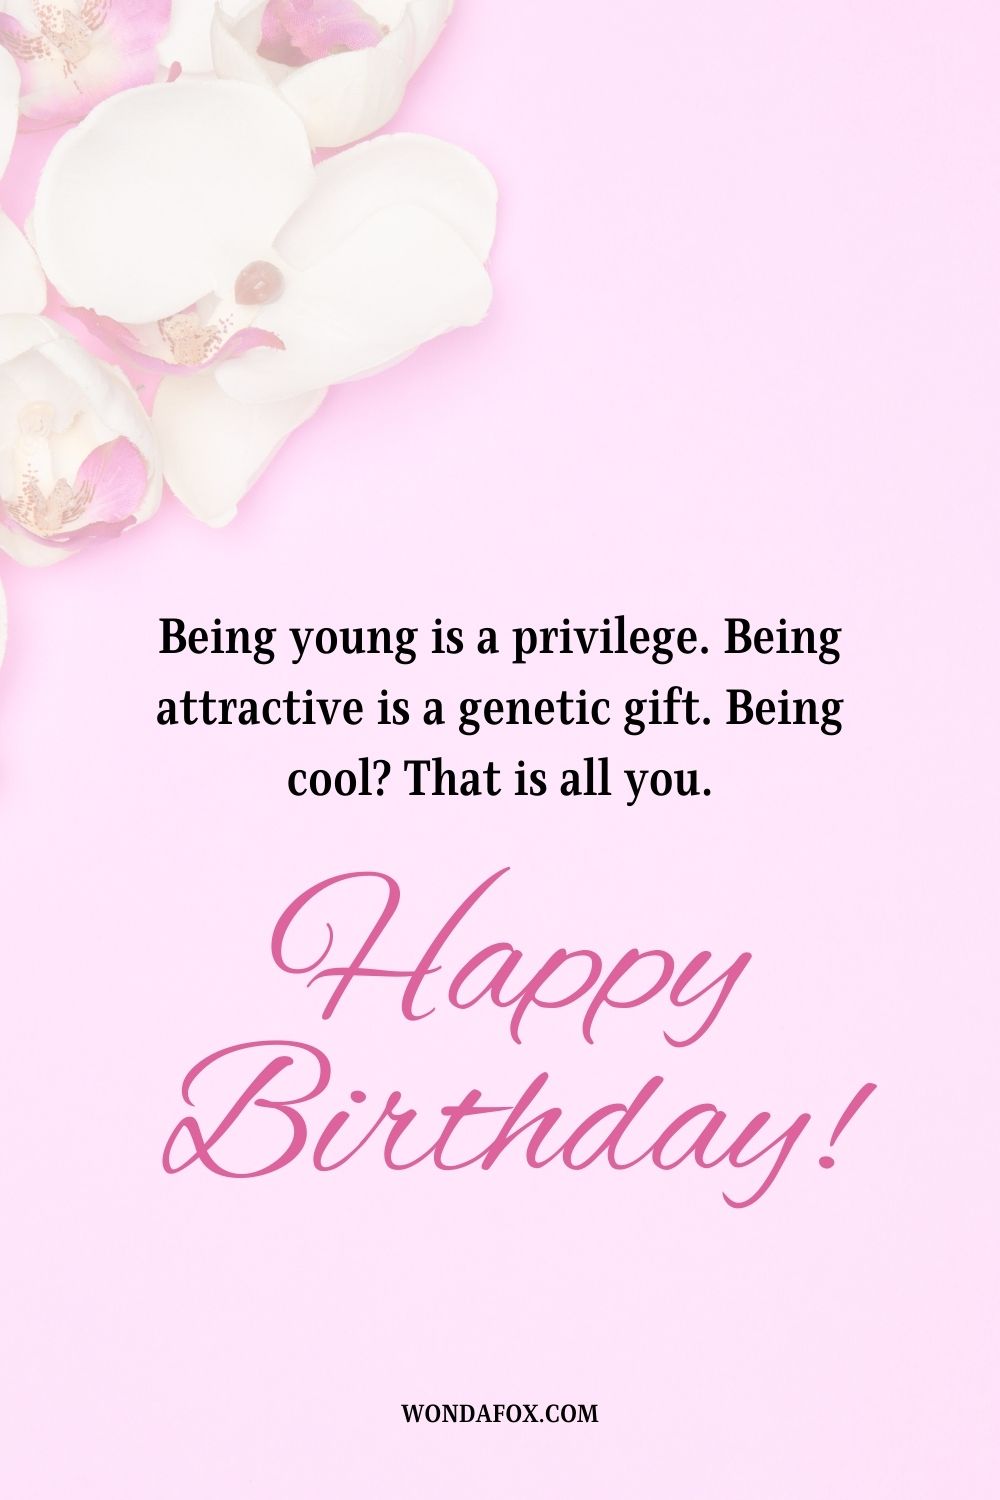 Being young is a privilege. Being attractive is a genetic gift. Being cool? That is all you. Happy birthday.